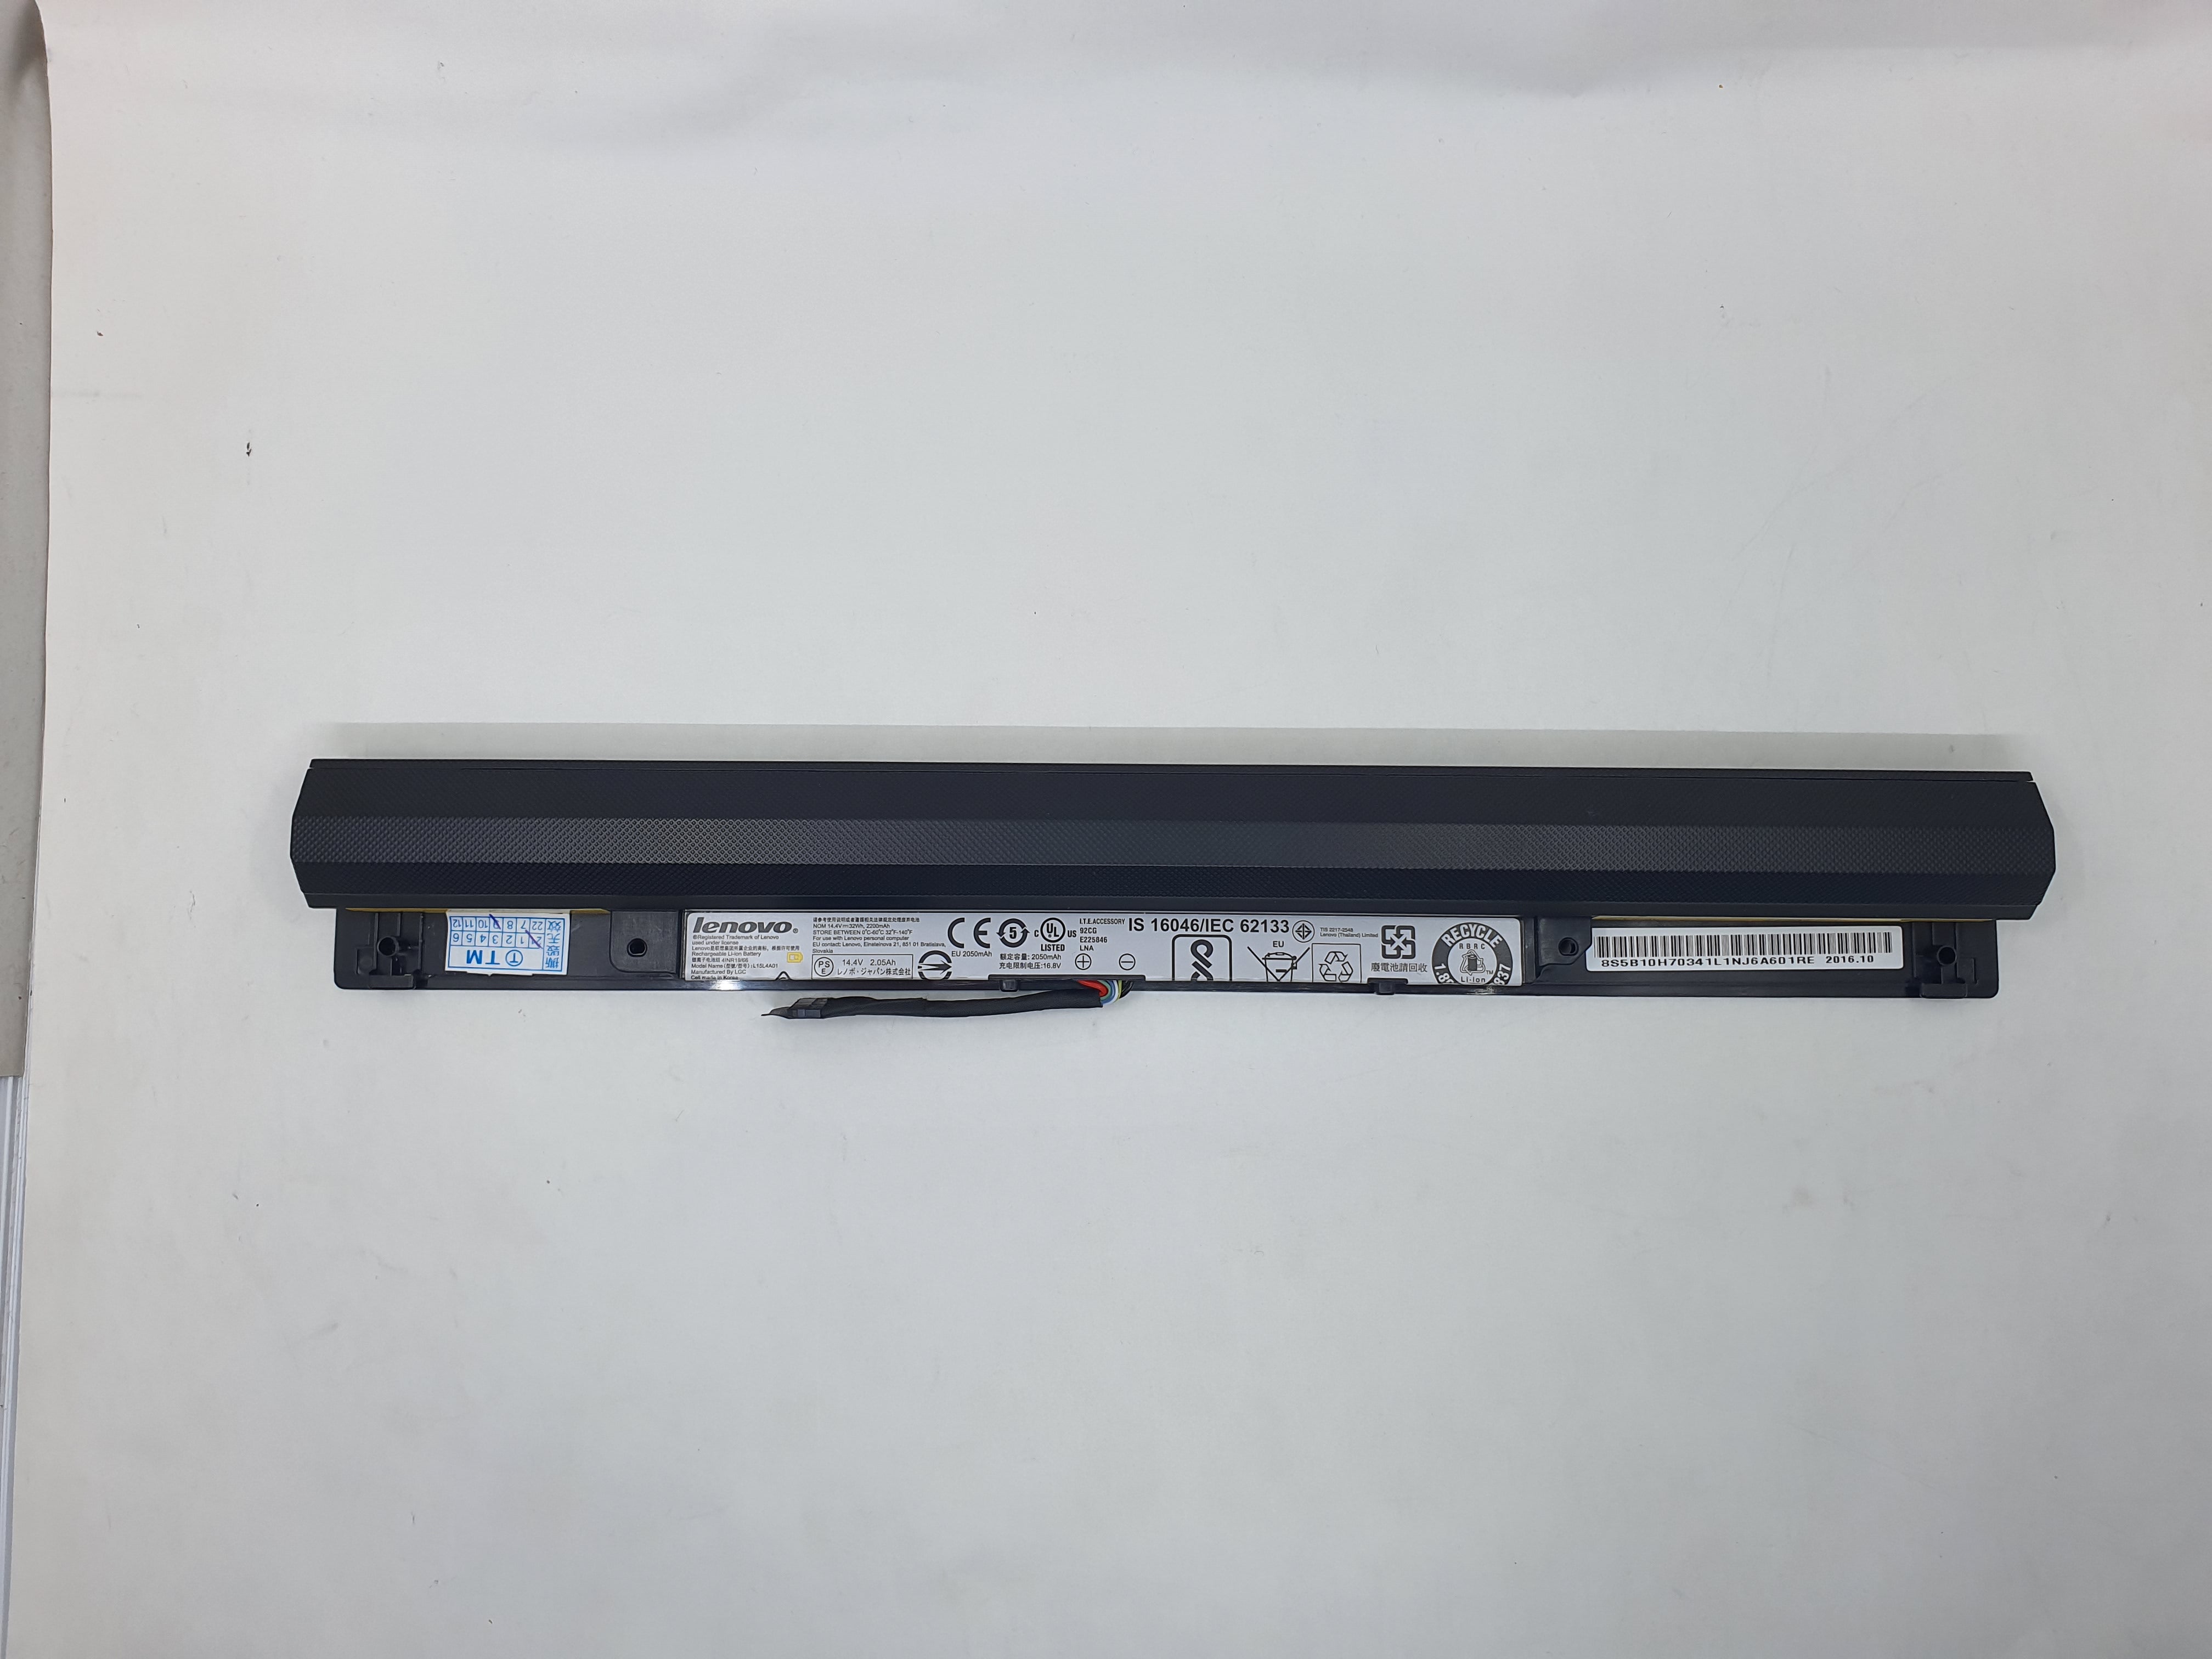 Lenovo Battery 300-15ISK A1 for Replacement - Lenovo IdeaPad 300-15ISK